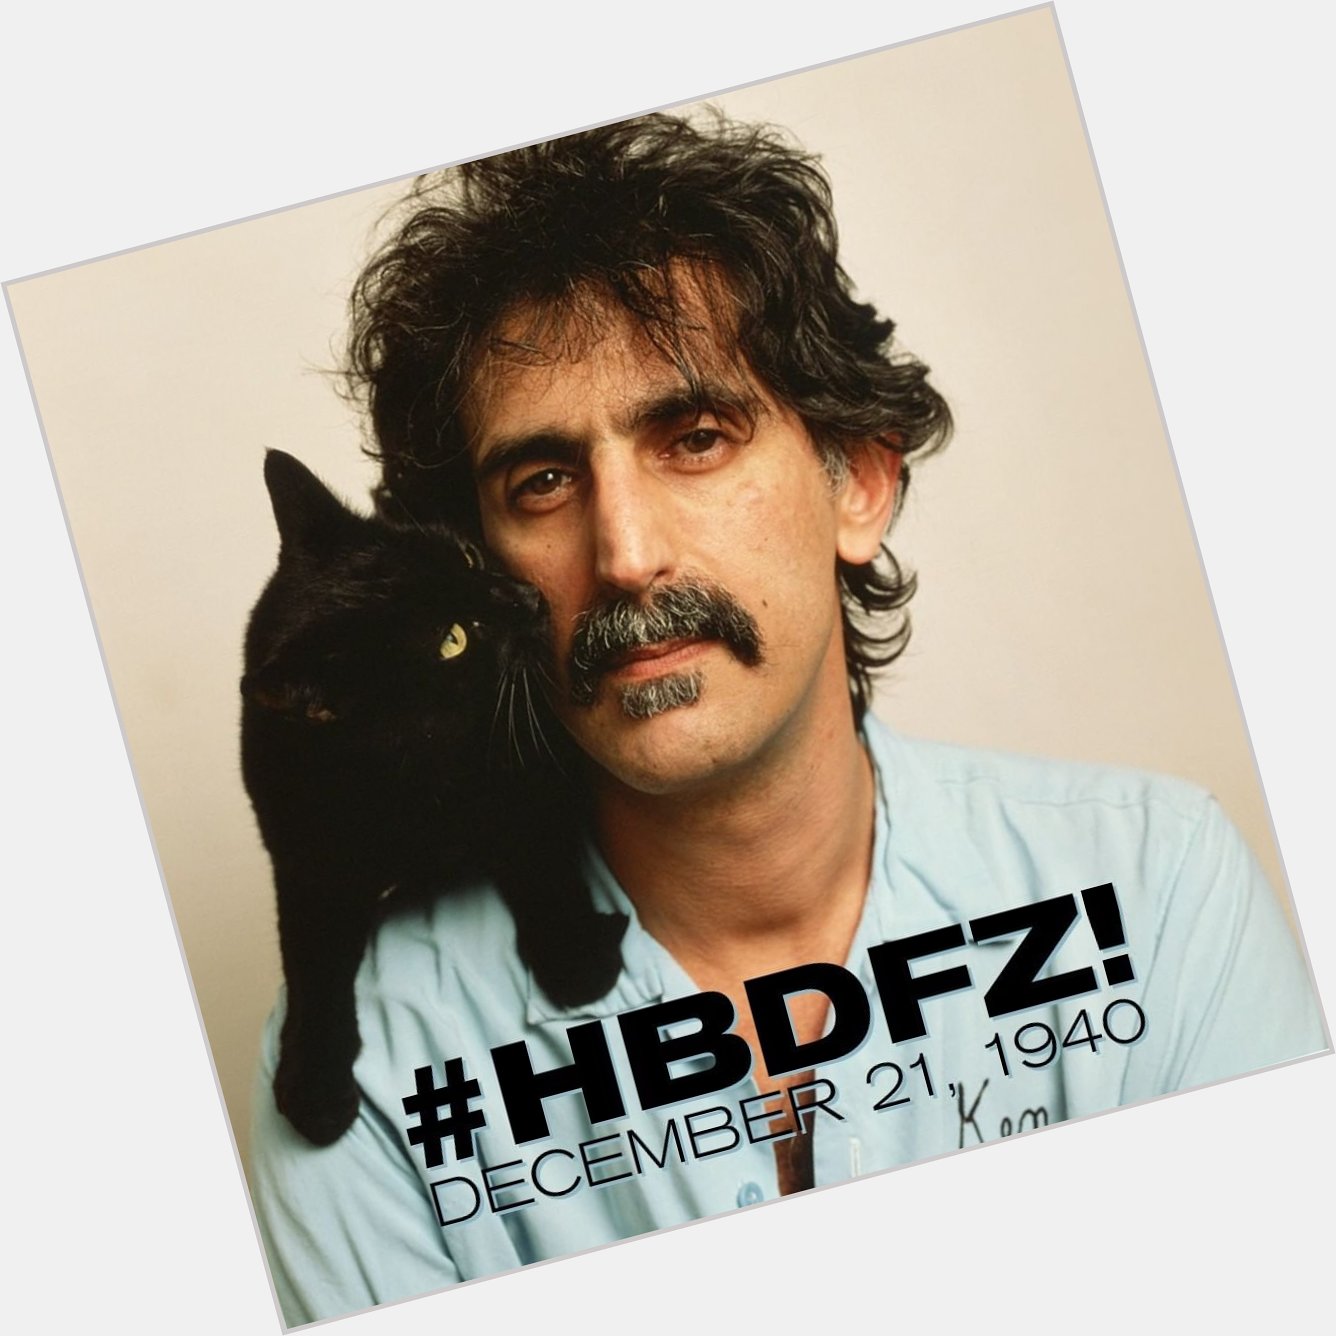 Happy Birthday Frank Zappa
And Thanks For All The Great Music     I learned a lot from you! 